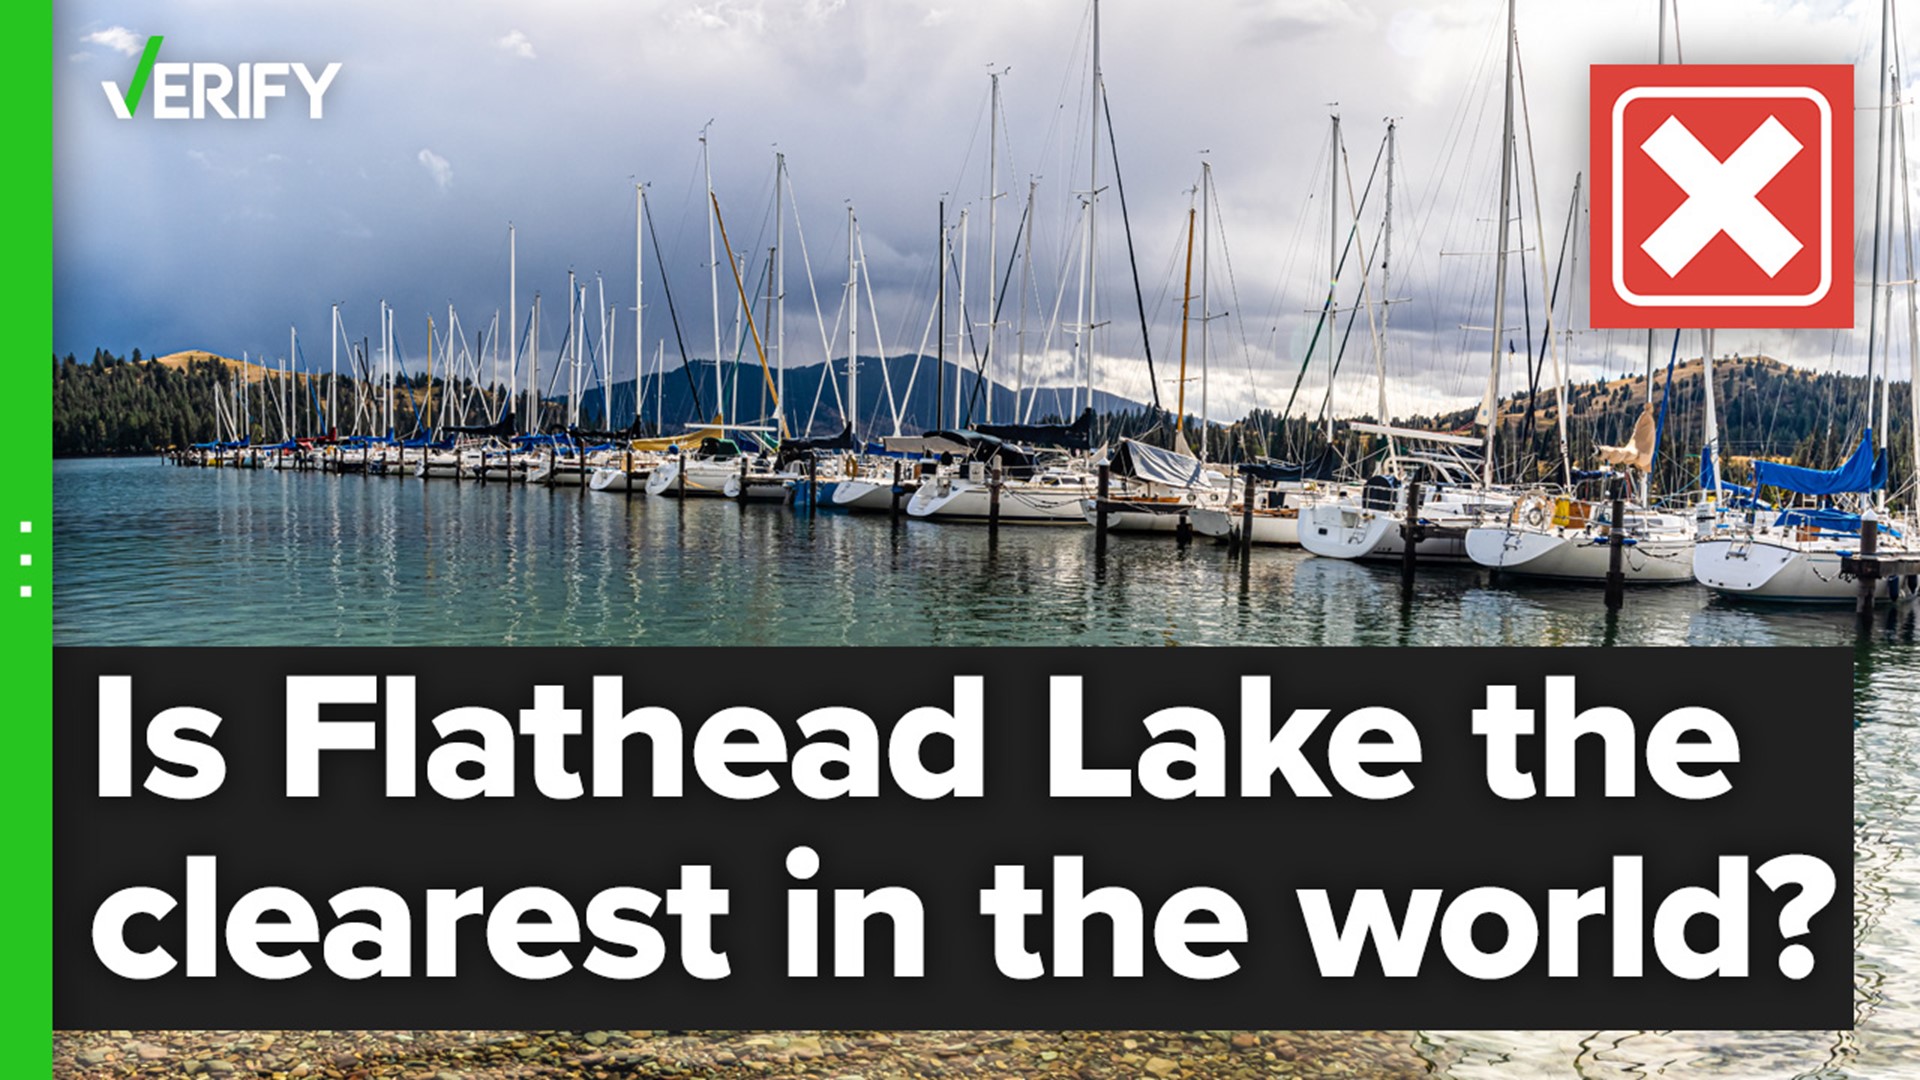 Is Flathead Lake in Montana the clearest water of any lake on Earth?  The VERIFY team confirms this is false.